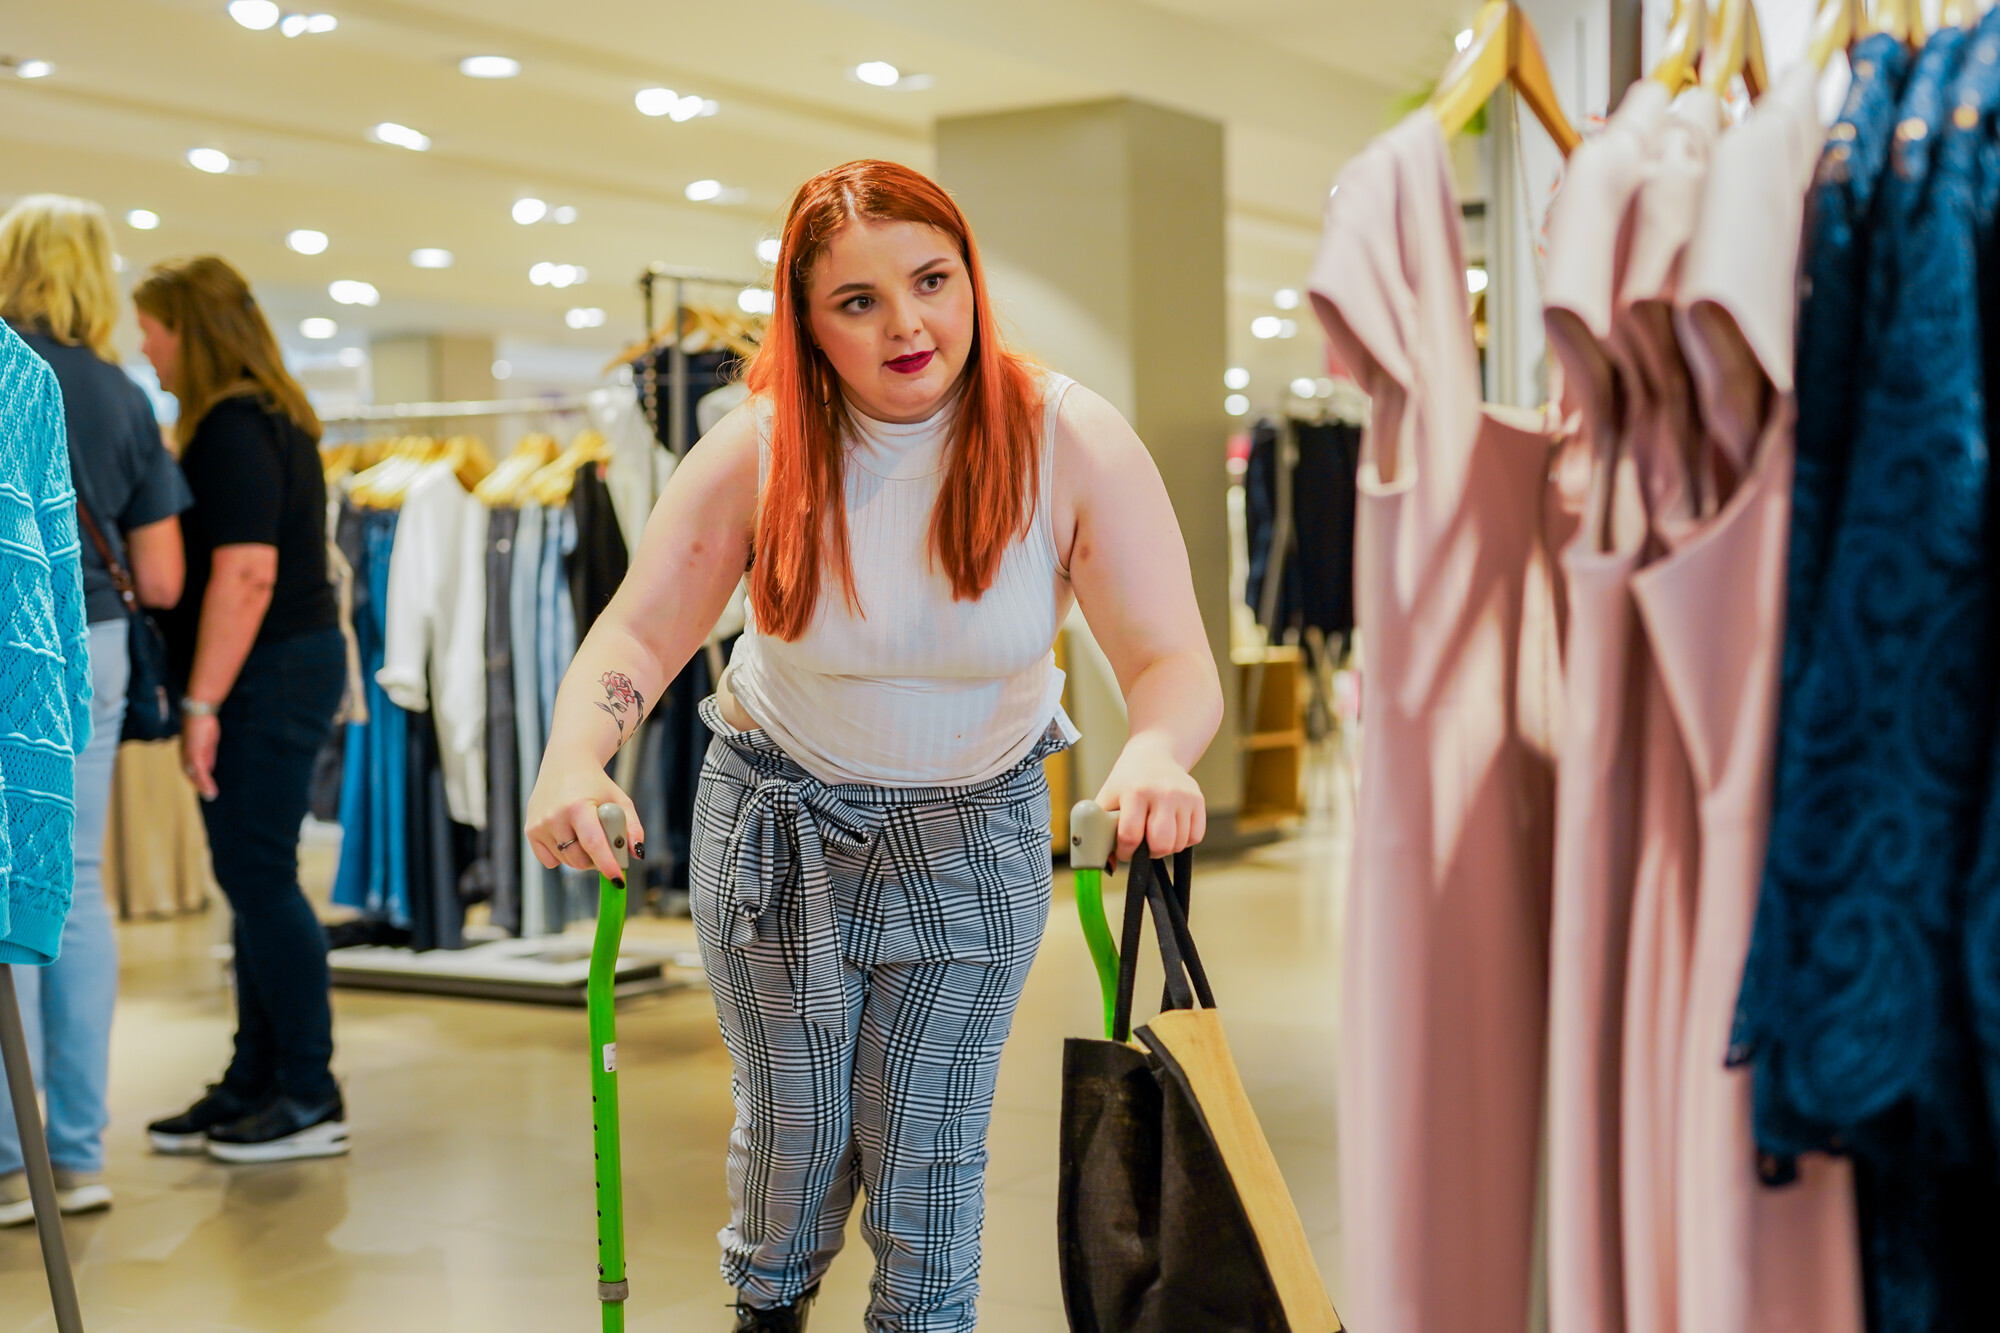 Woman with long red hair and bright green walking sticks looks at dresses in a clothes store. She has a tattoo of a rose on her right arm.